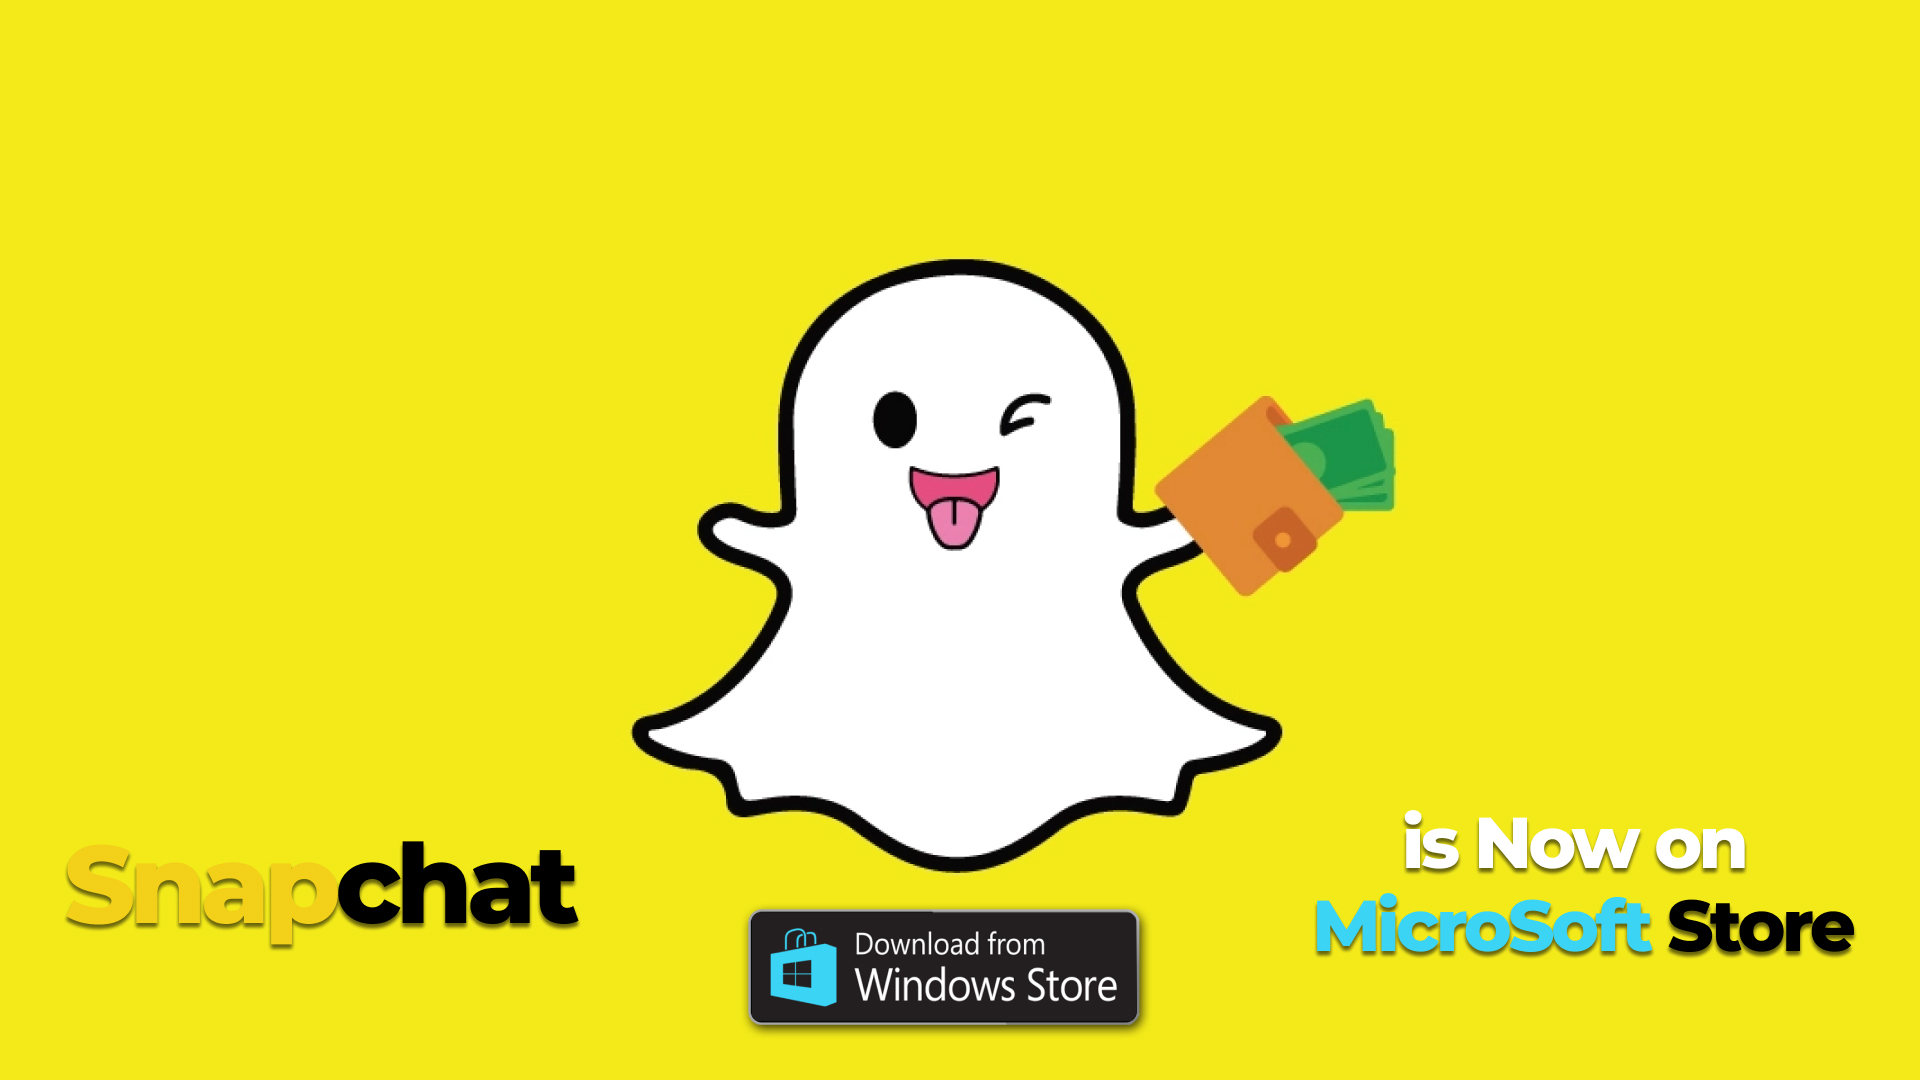 Snapchat is now available on Microsoft Store